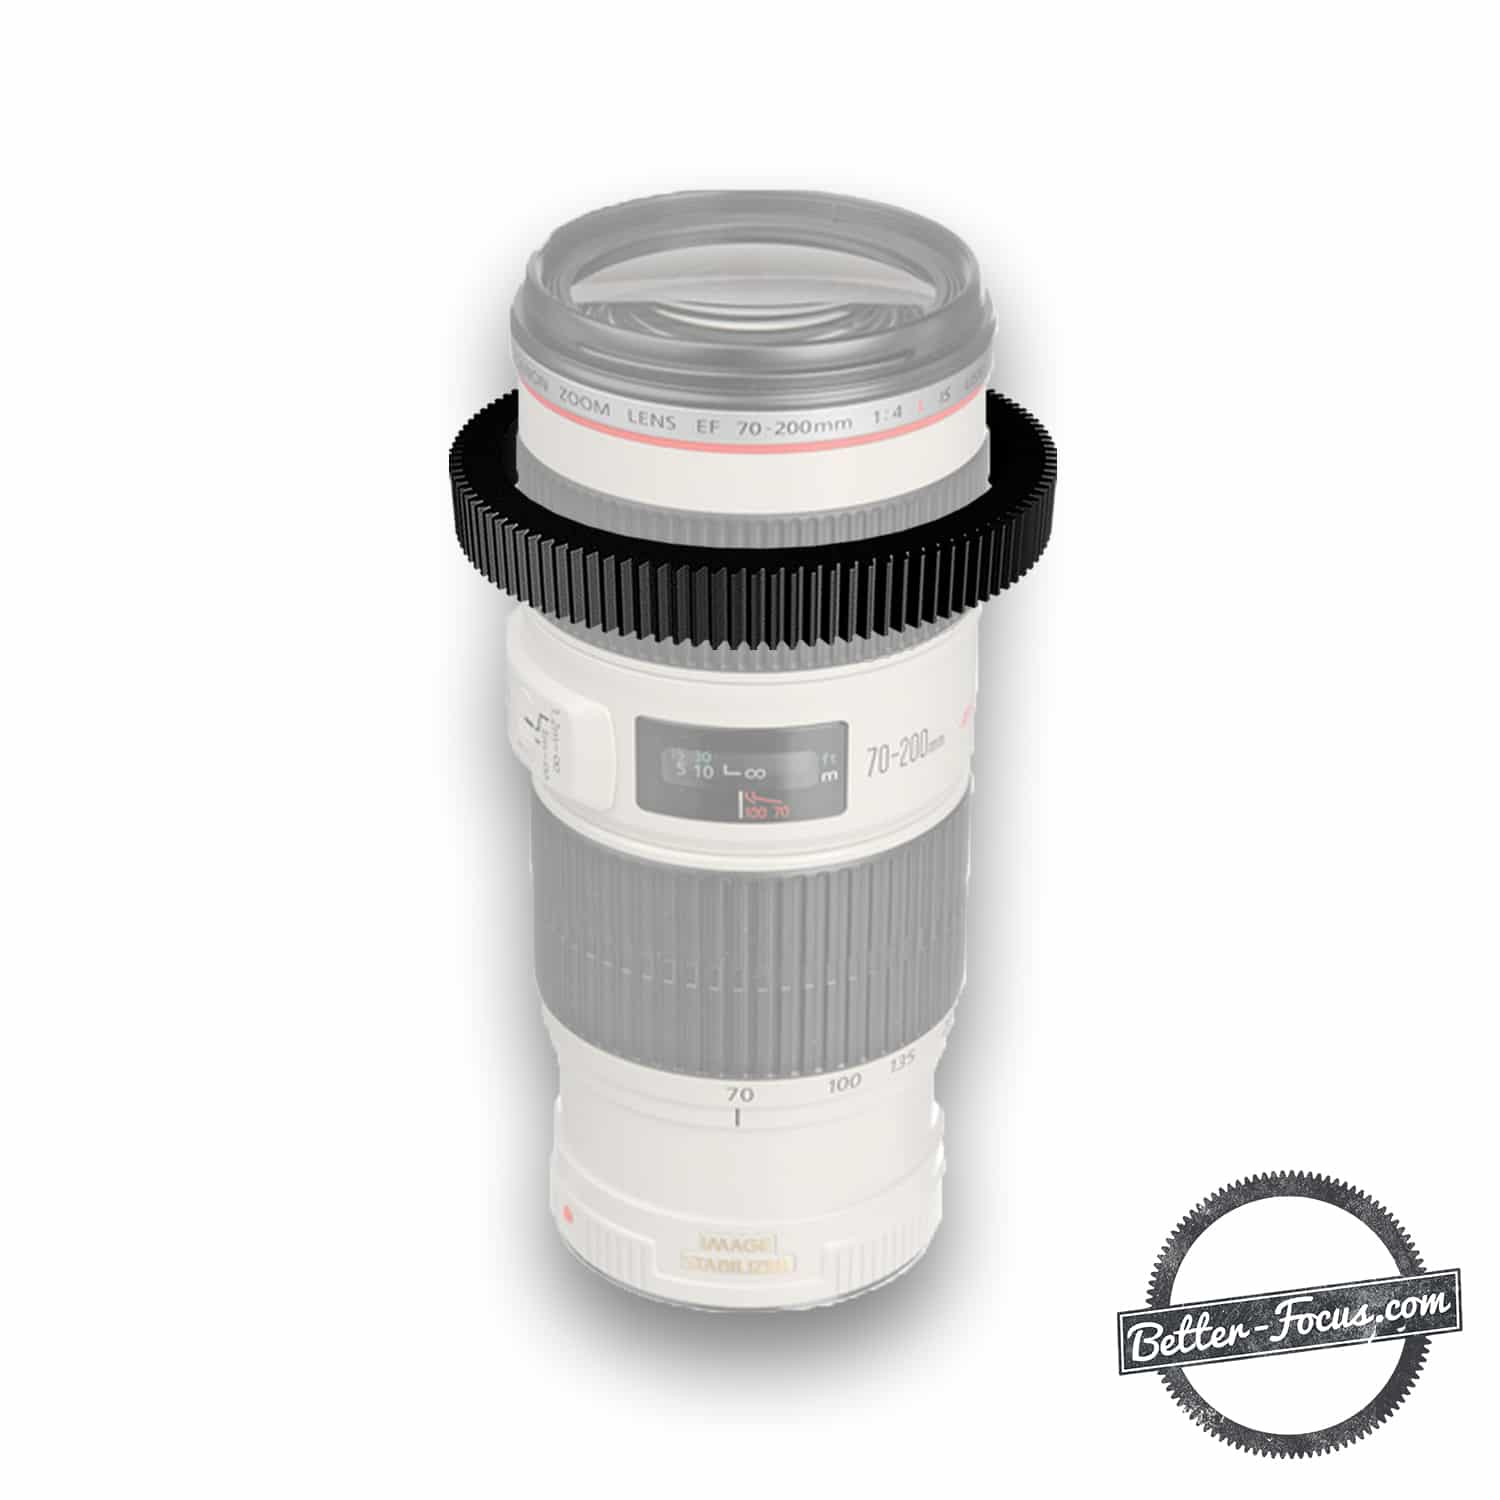 Follow Focus Gear for CANON EF 70-200MM F4L IS USM  lens